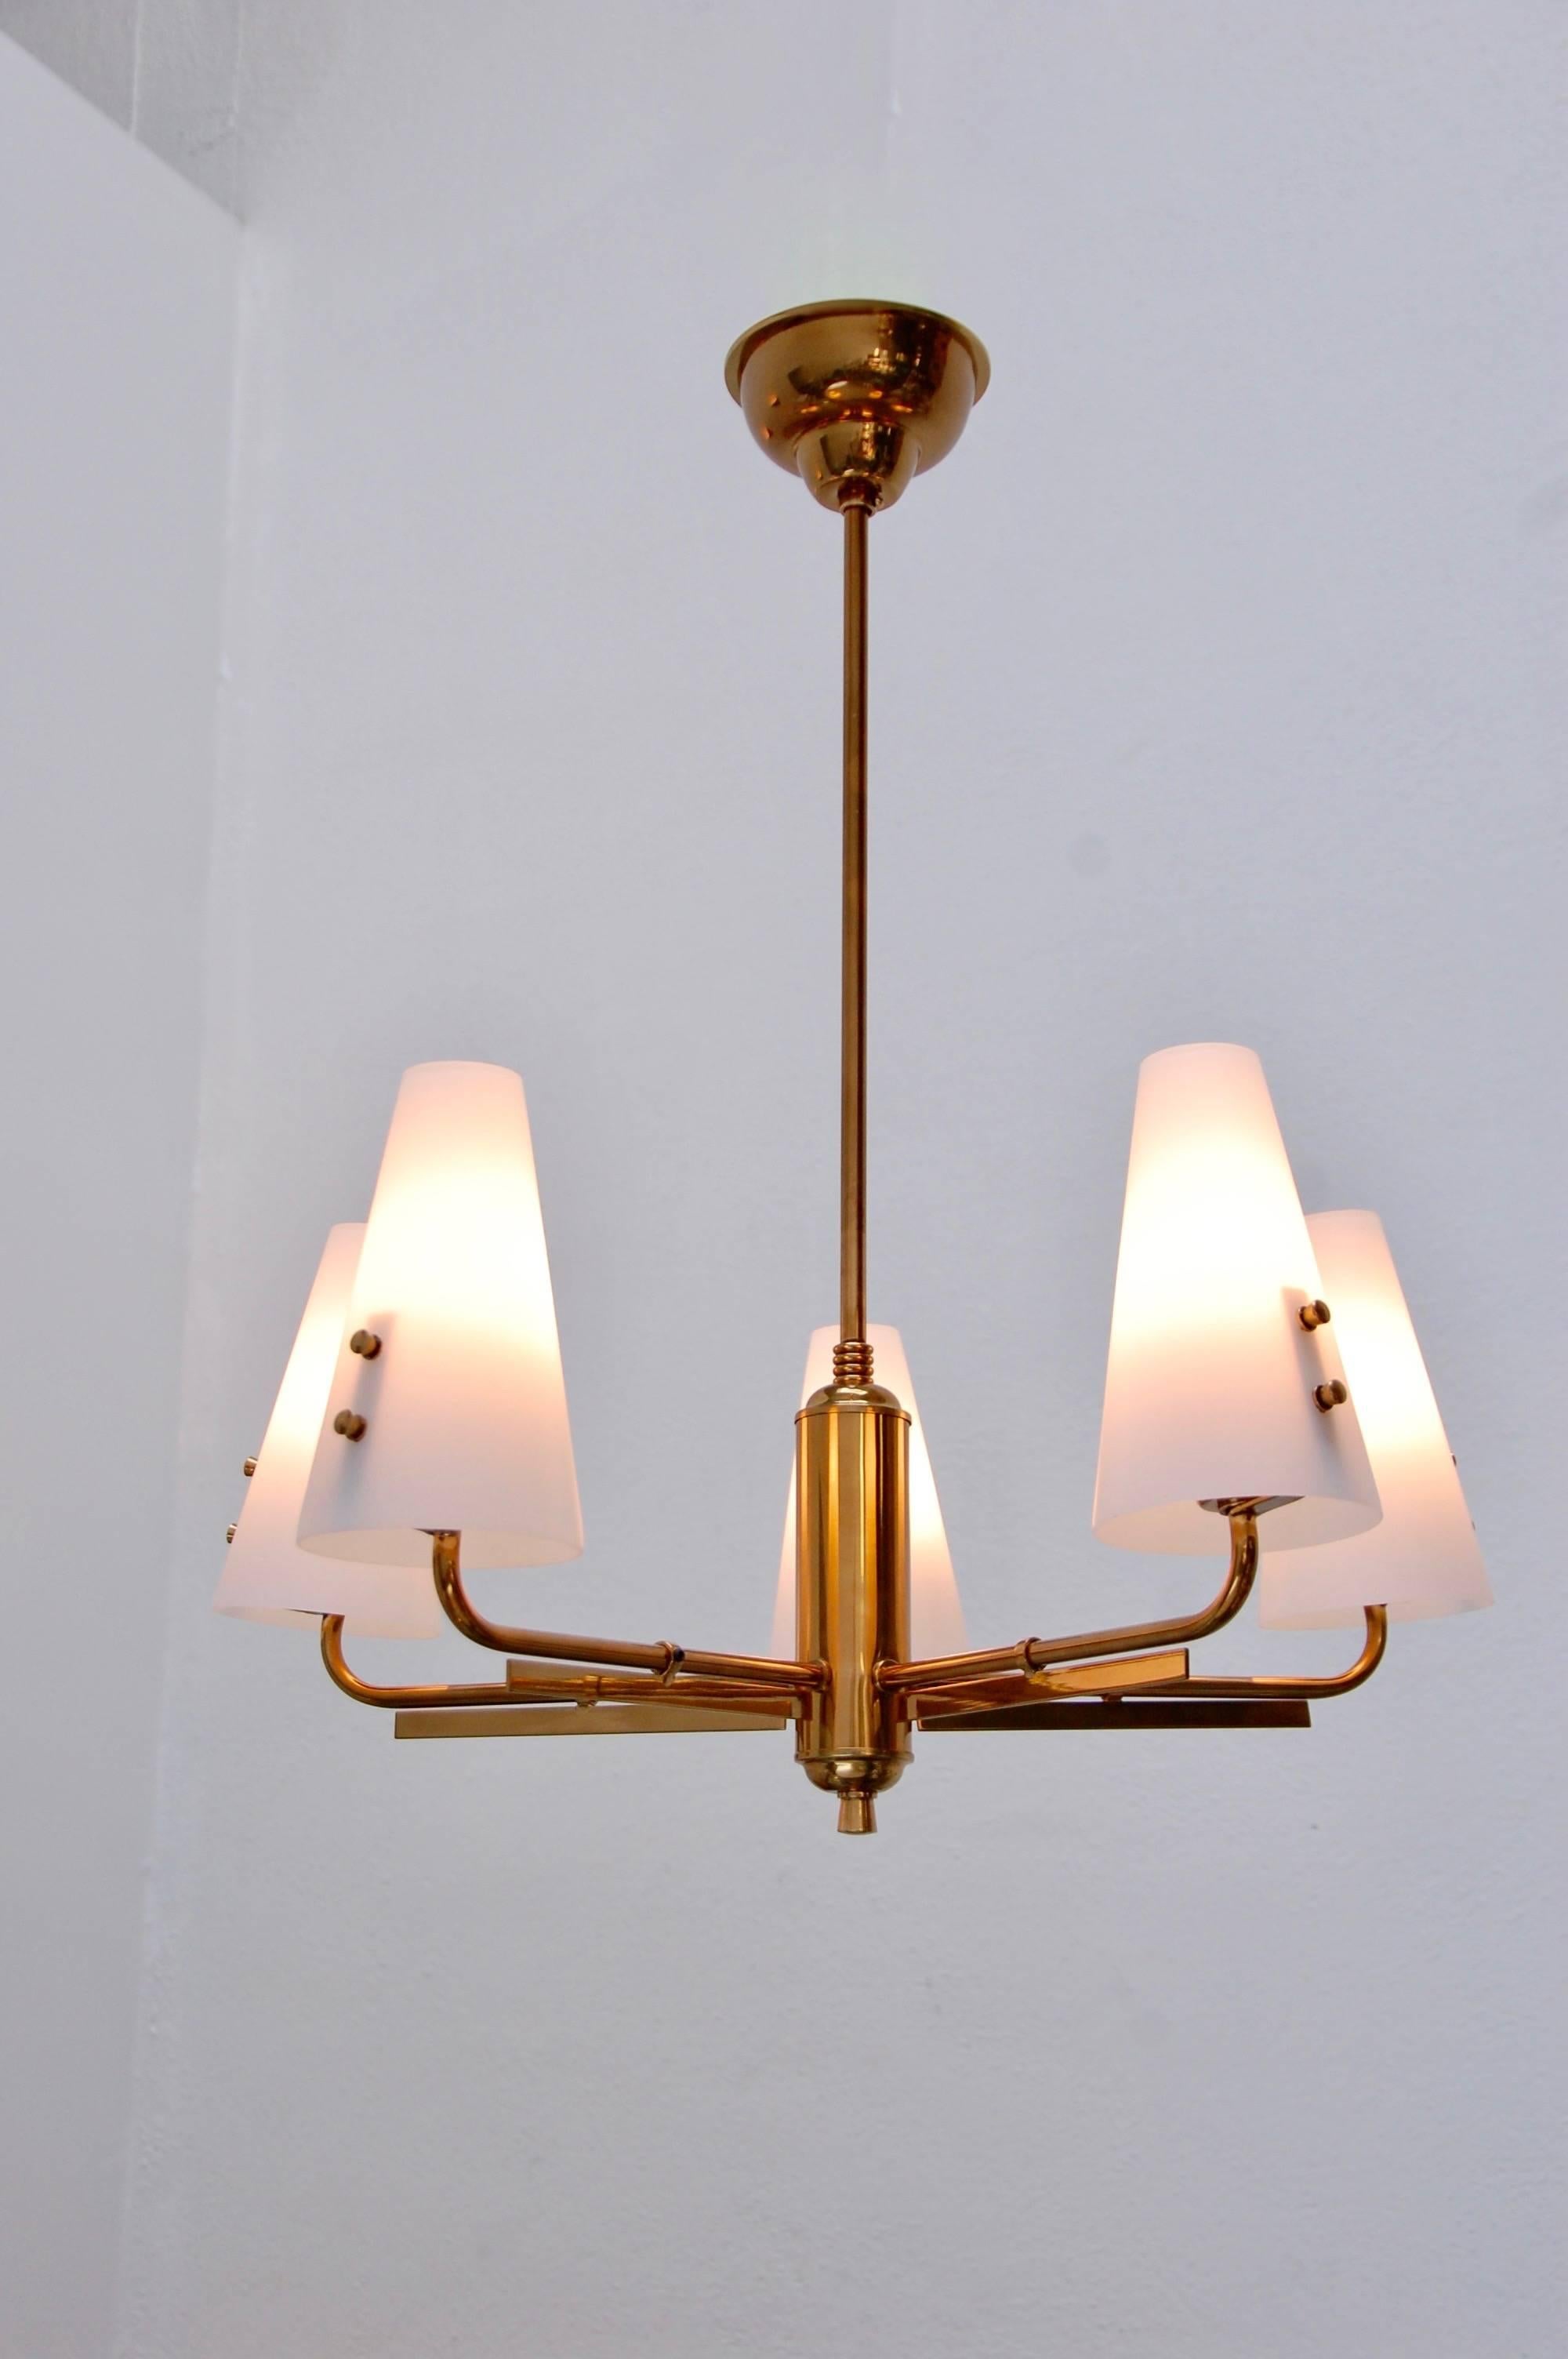 Beautiful mid-size six-arm Italian chandelier from the 1950s. Single E14 candelabra based sockets each shade. Fully restored, and ready for use in the US. 

Measures: Diameter 20”
Overall drop height 22”
Fixture height 7”

We at Lumfardo